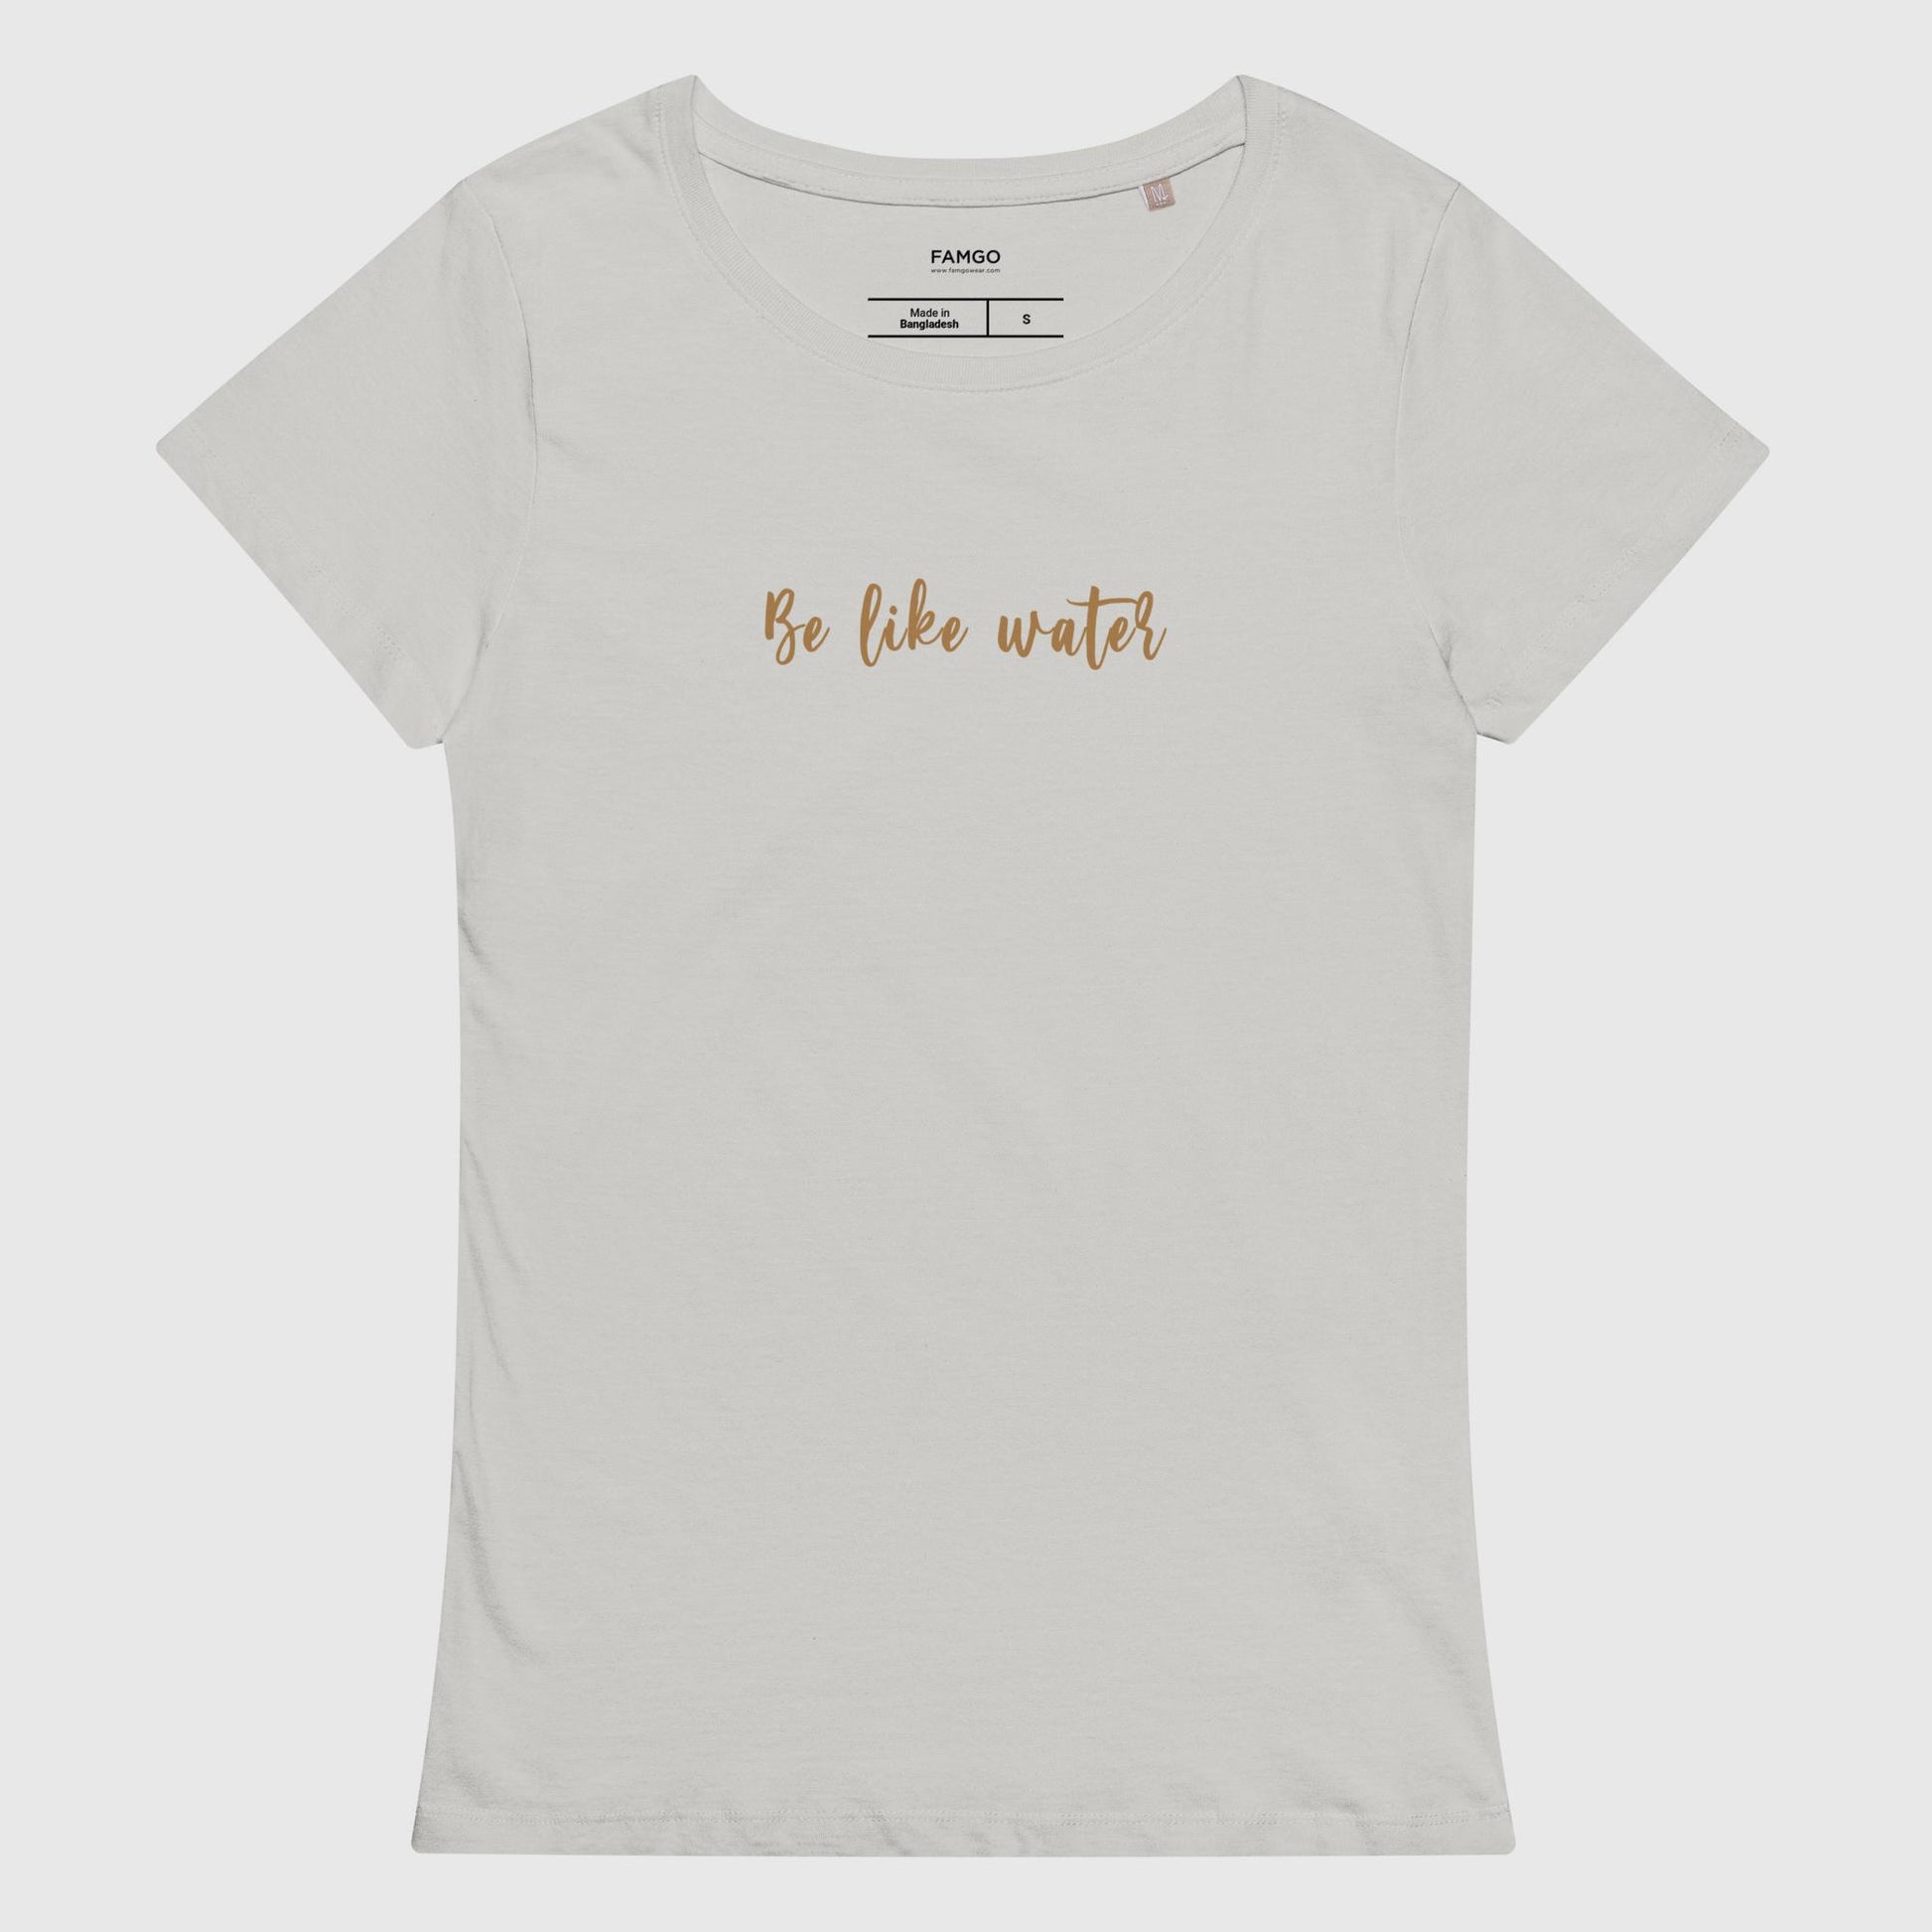 Women's pure gray organic cotton t-shirt that features Bruce Lee's inspirational quote, "Be Like Water."